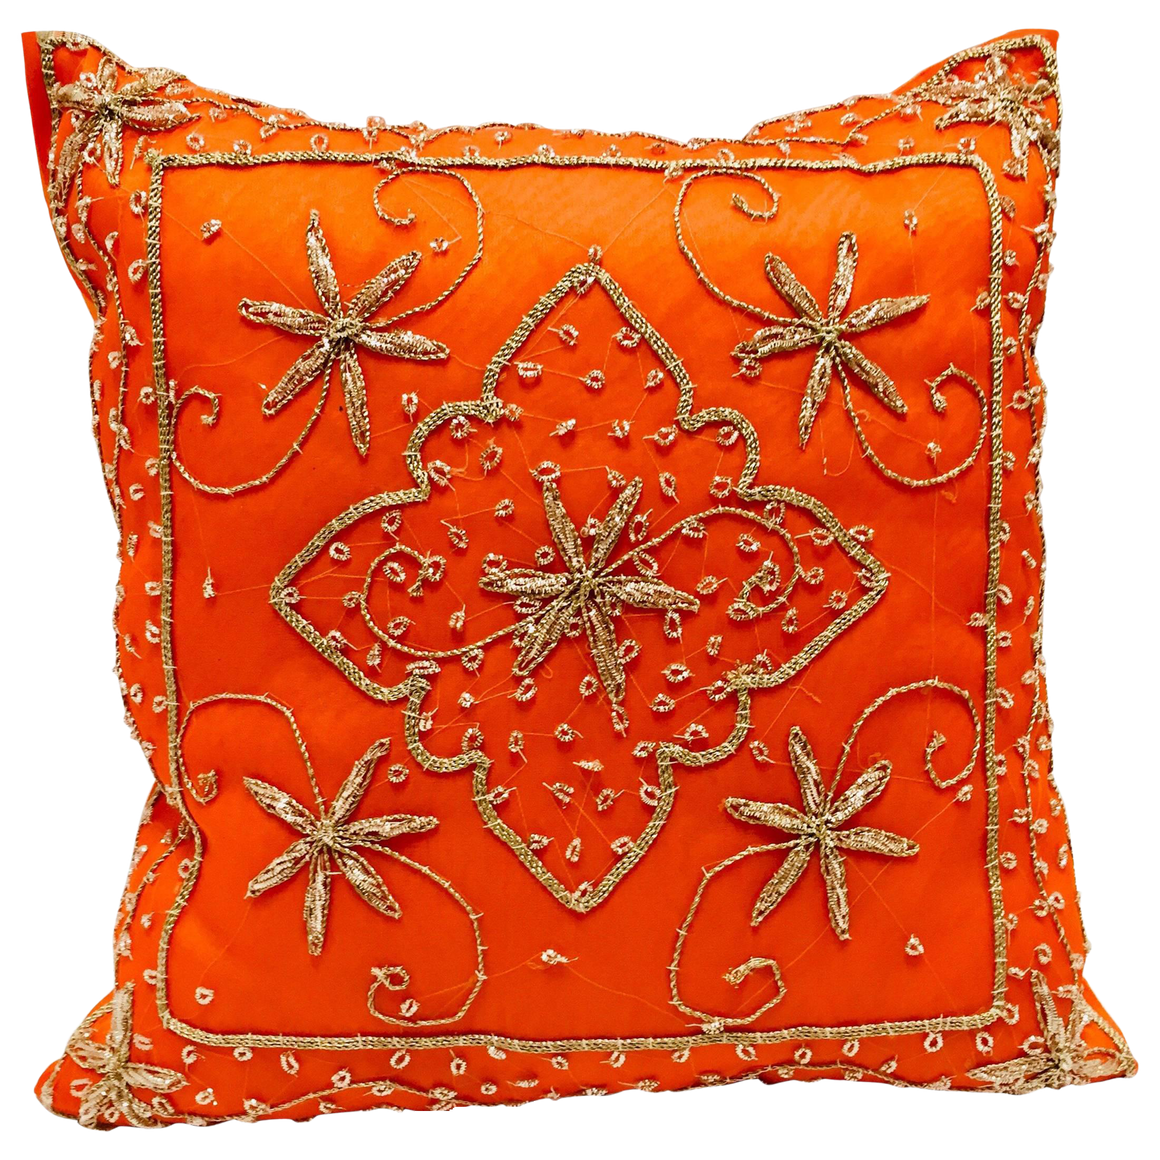 Throw Decorative Orange Accent Pillow Embellished With Sequins and Beads